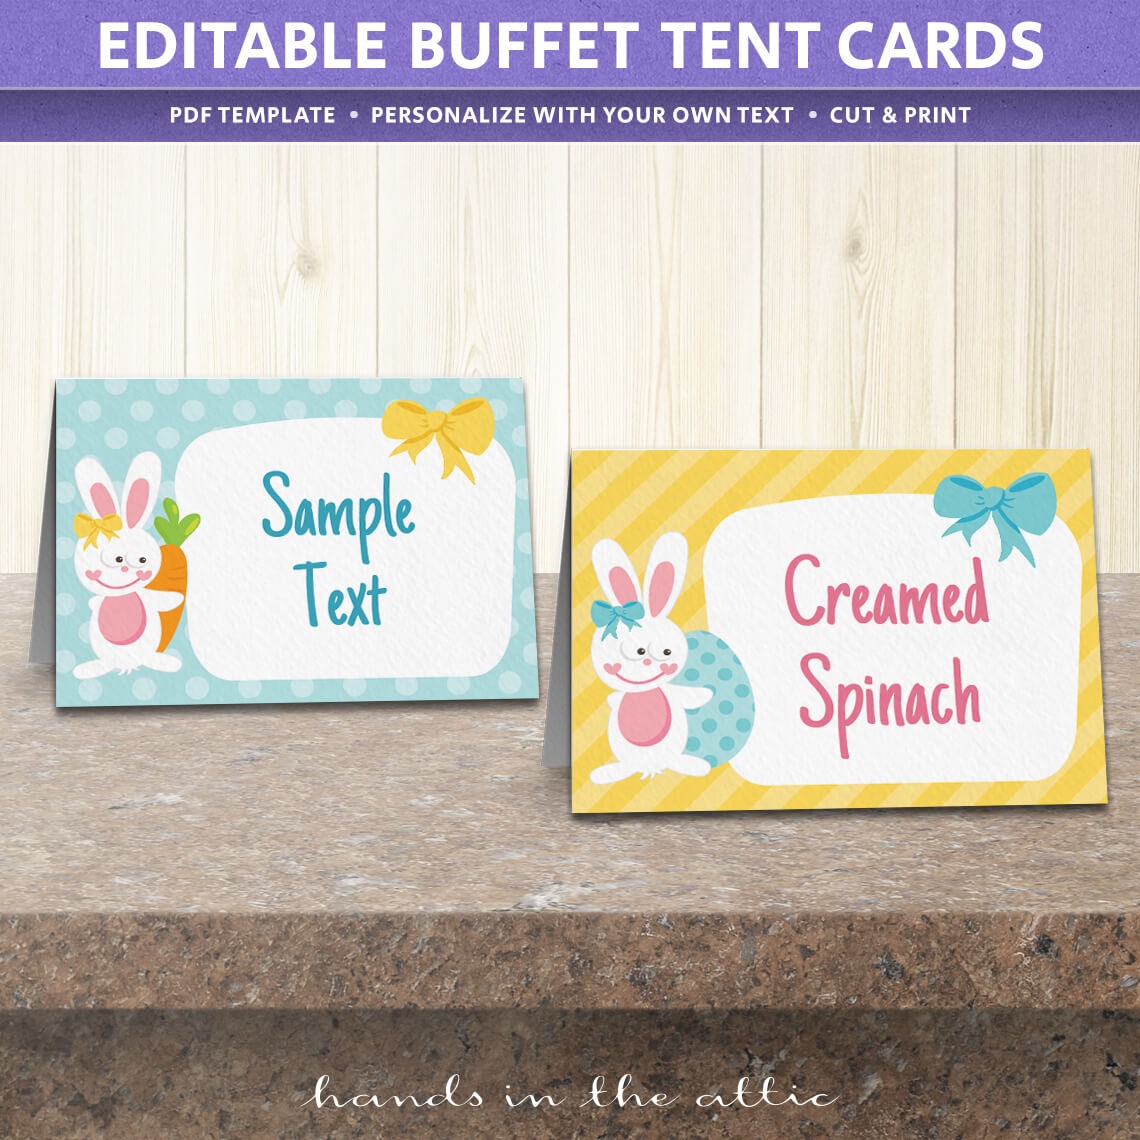 Free Easter Party Food Labels | Printable Download | Hands In The Attic - Free Printable Buffet Food Labels